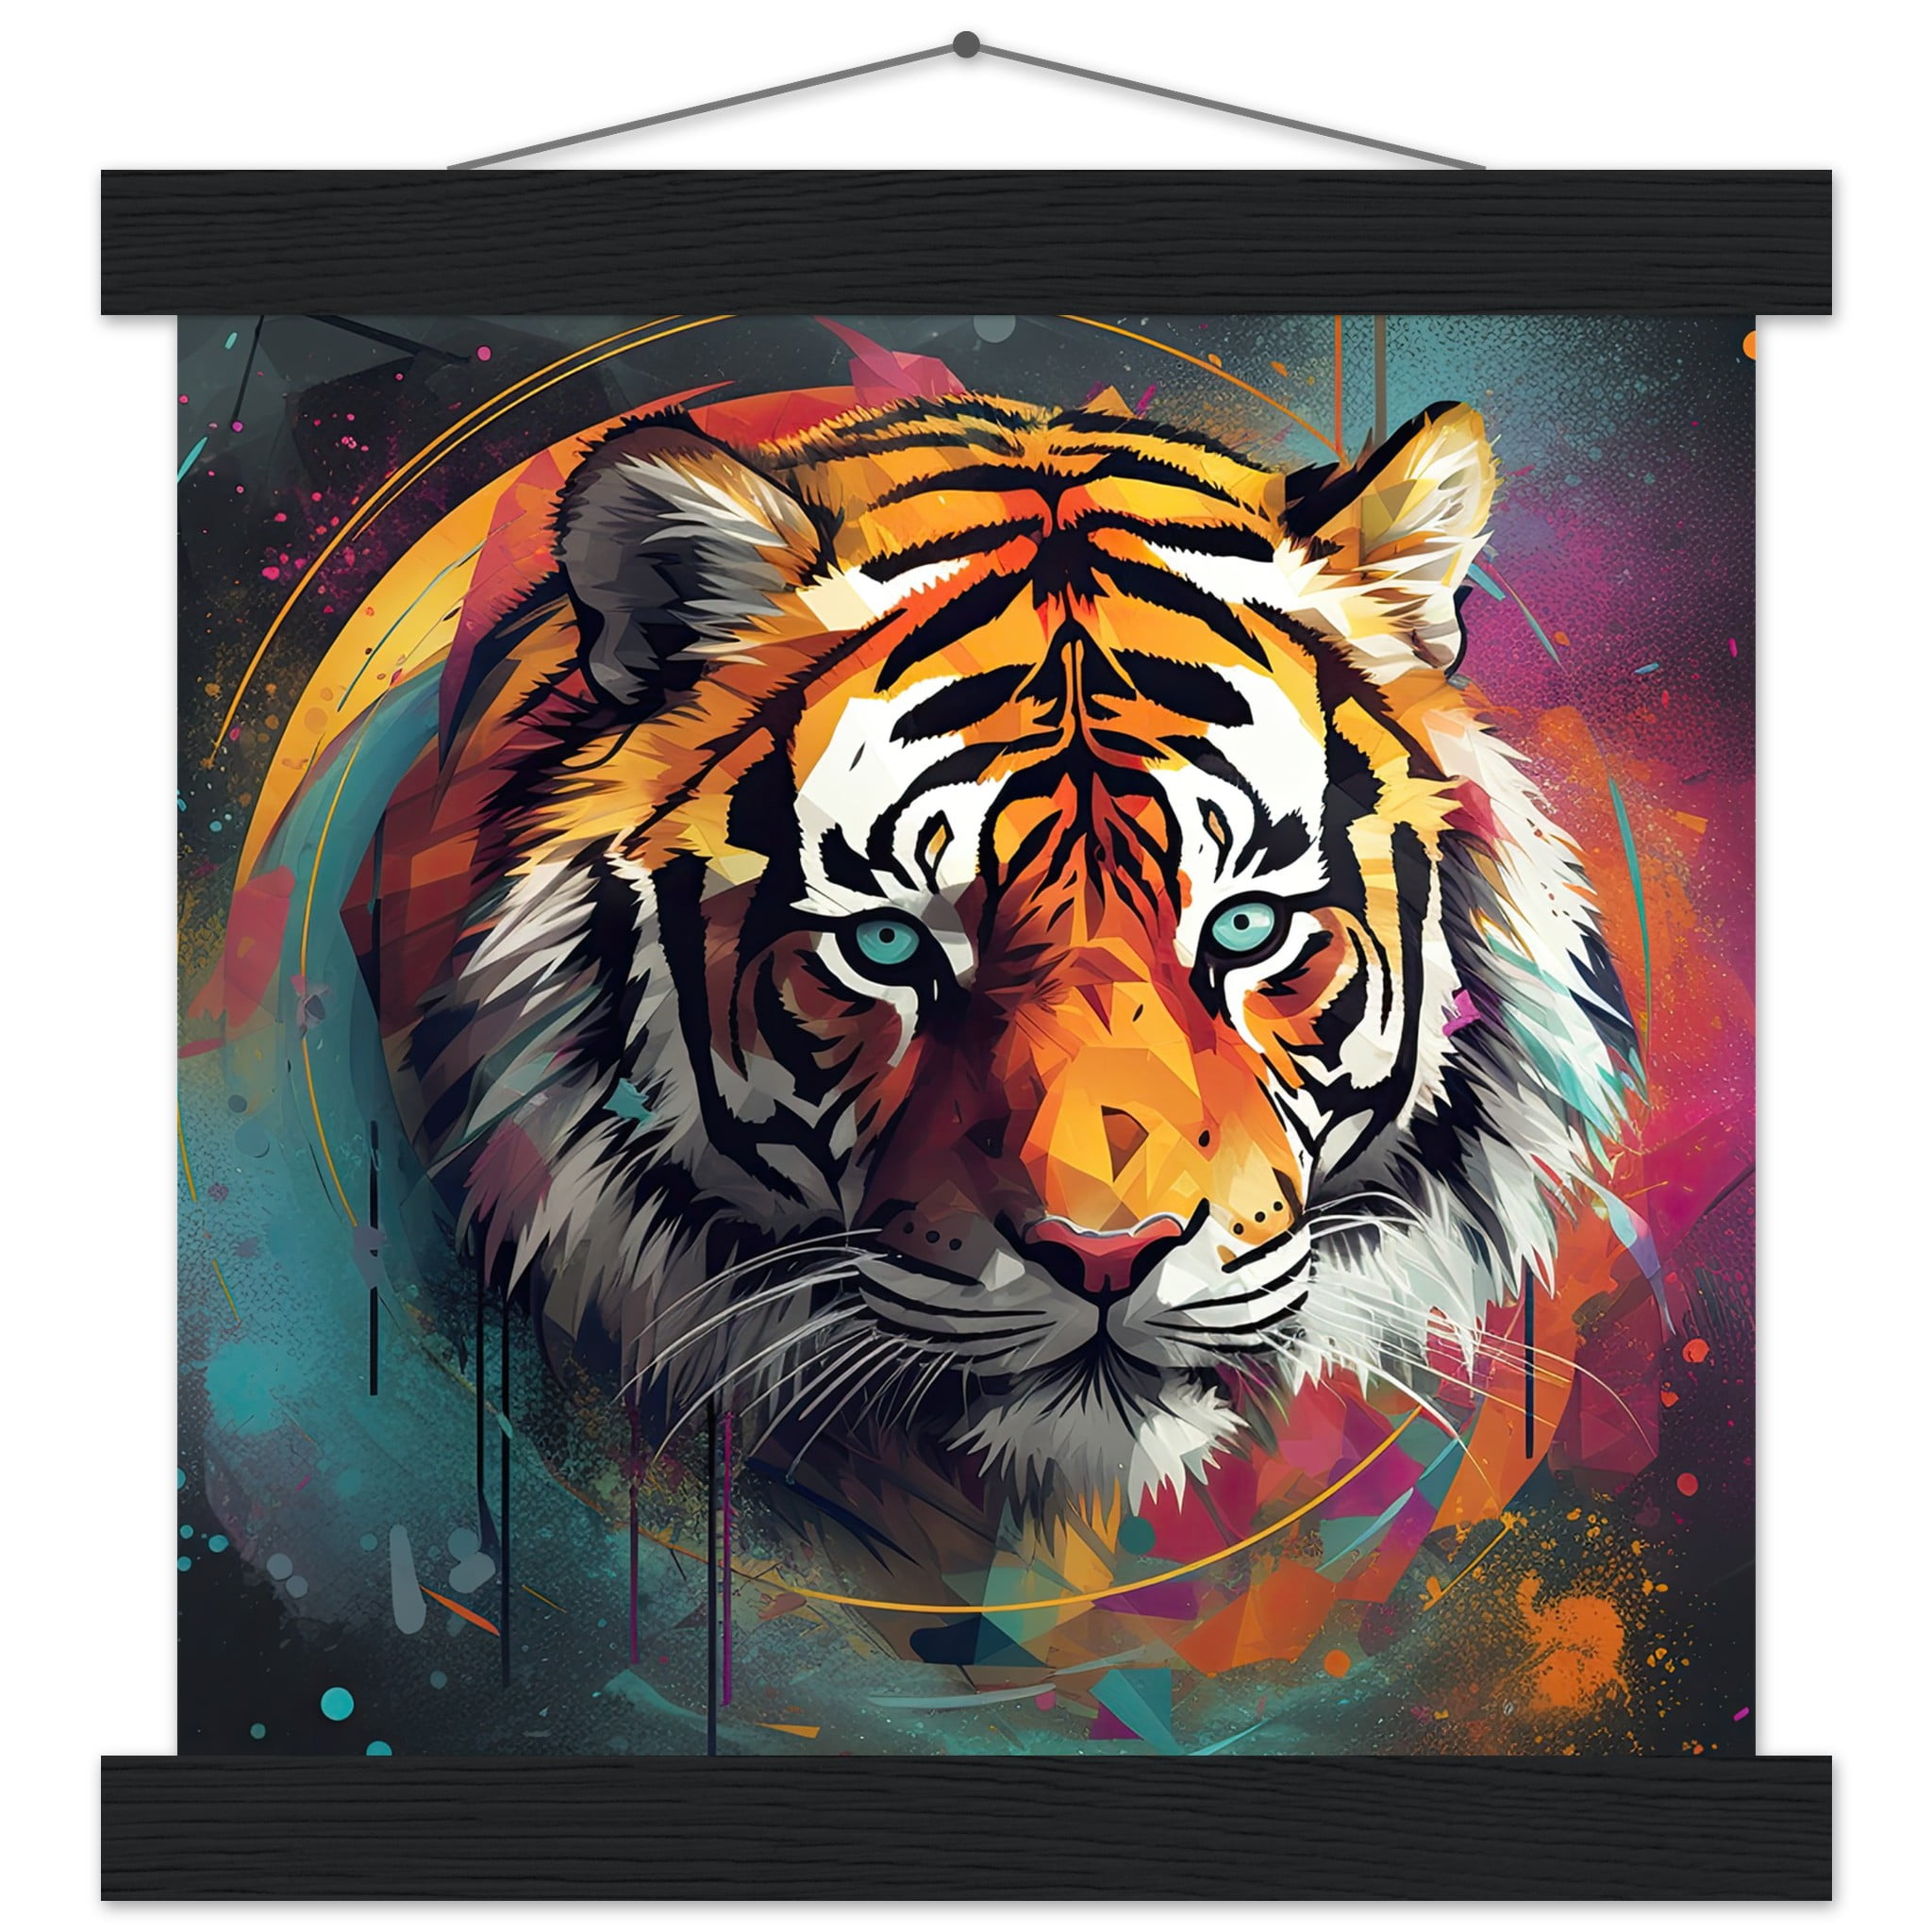 Tiger Colorful Abstract Art Print with Hanger – 25×25 cm / 10×10″, Black wall hanger